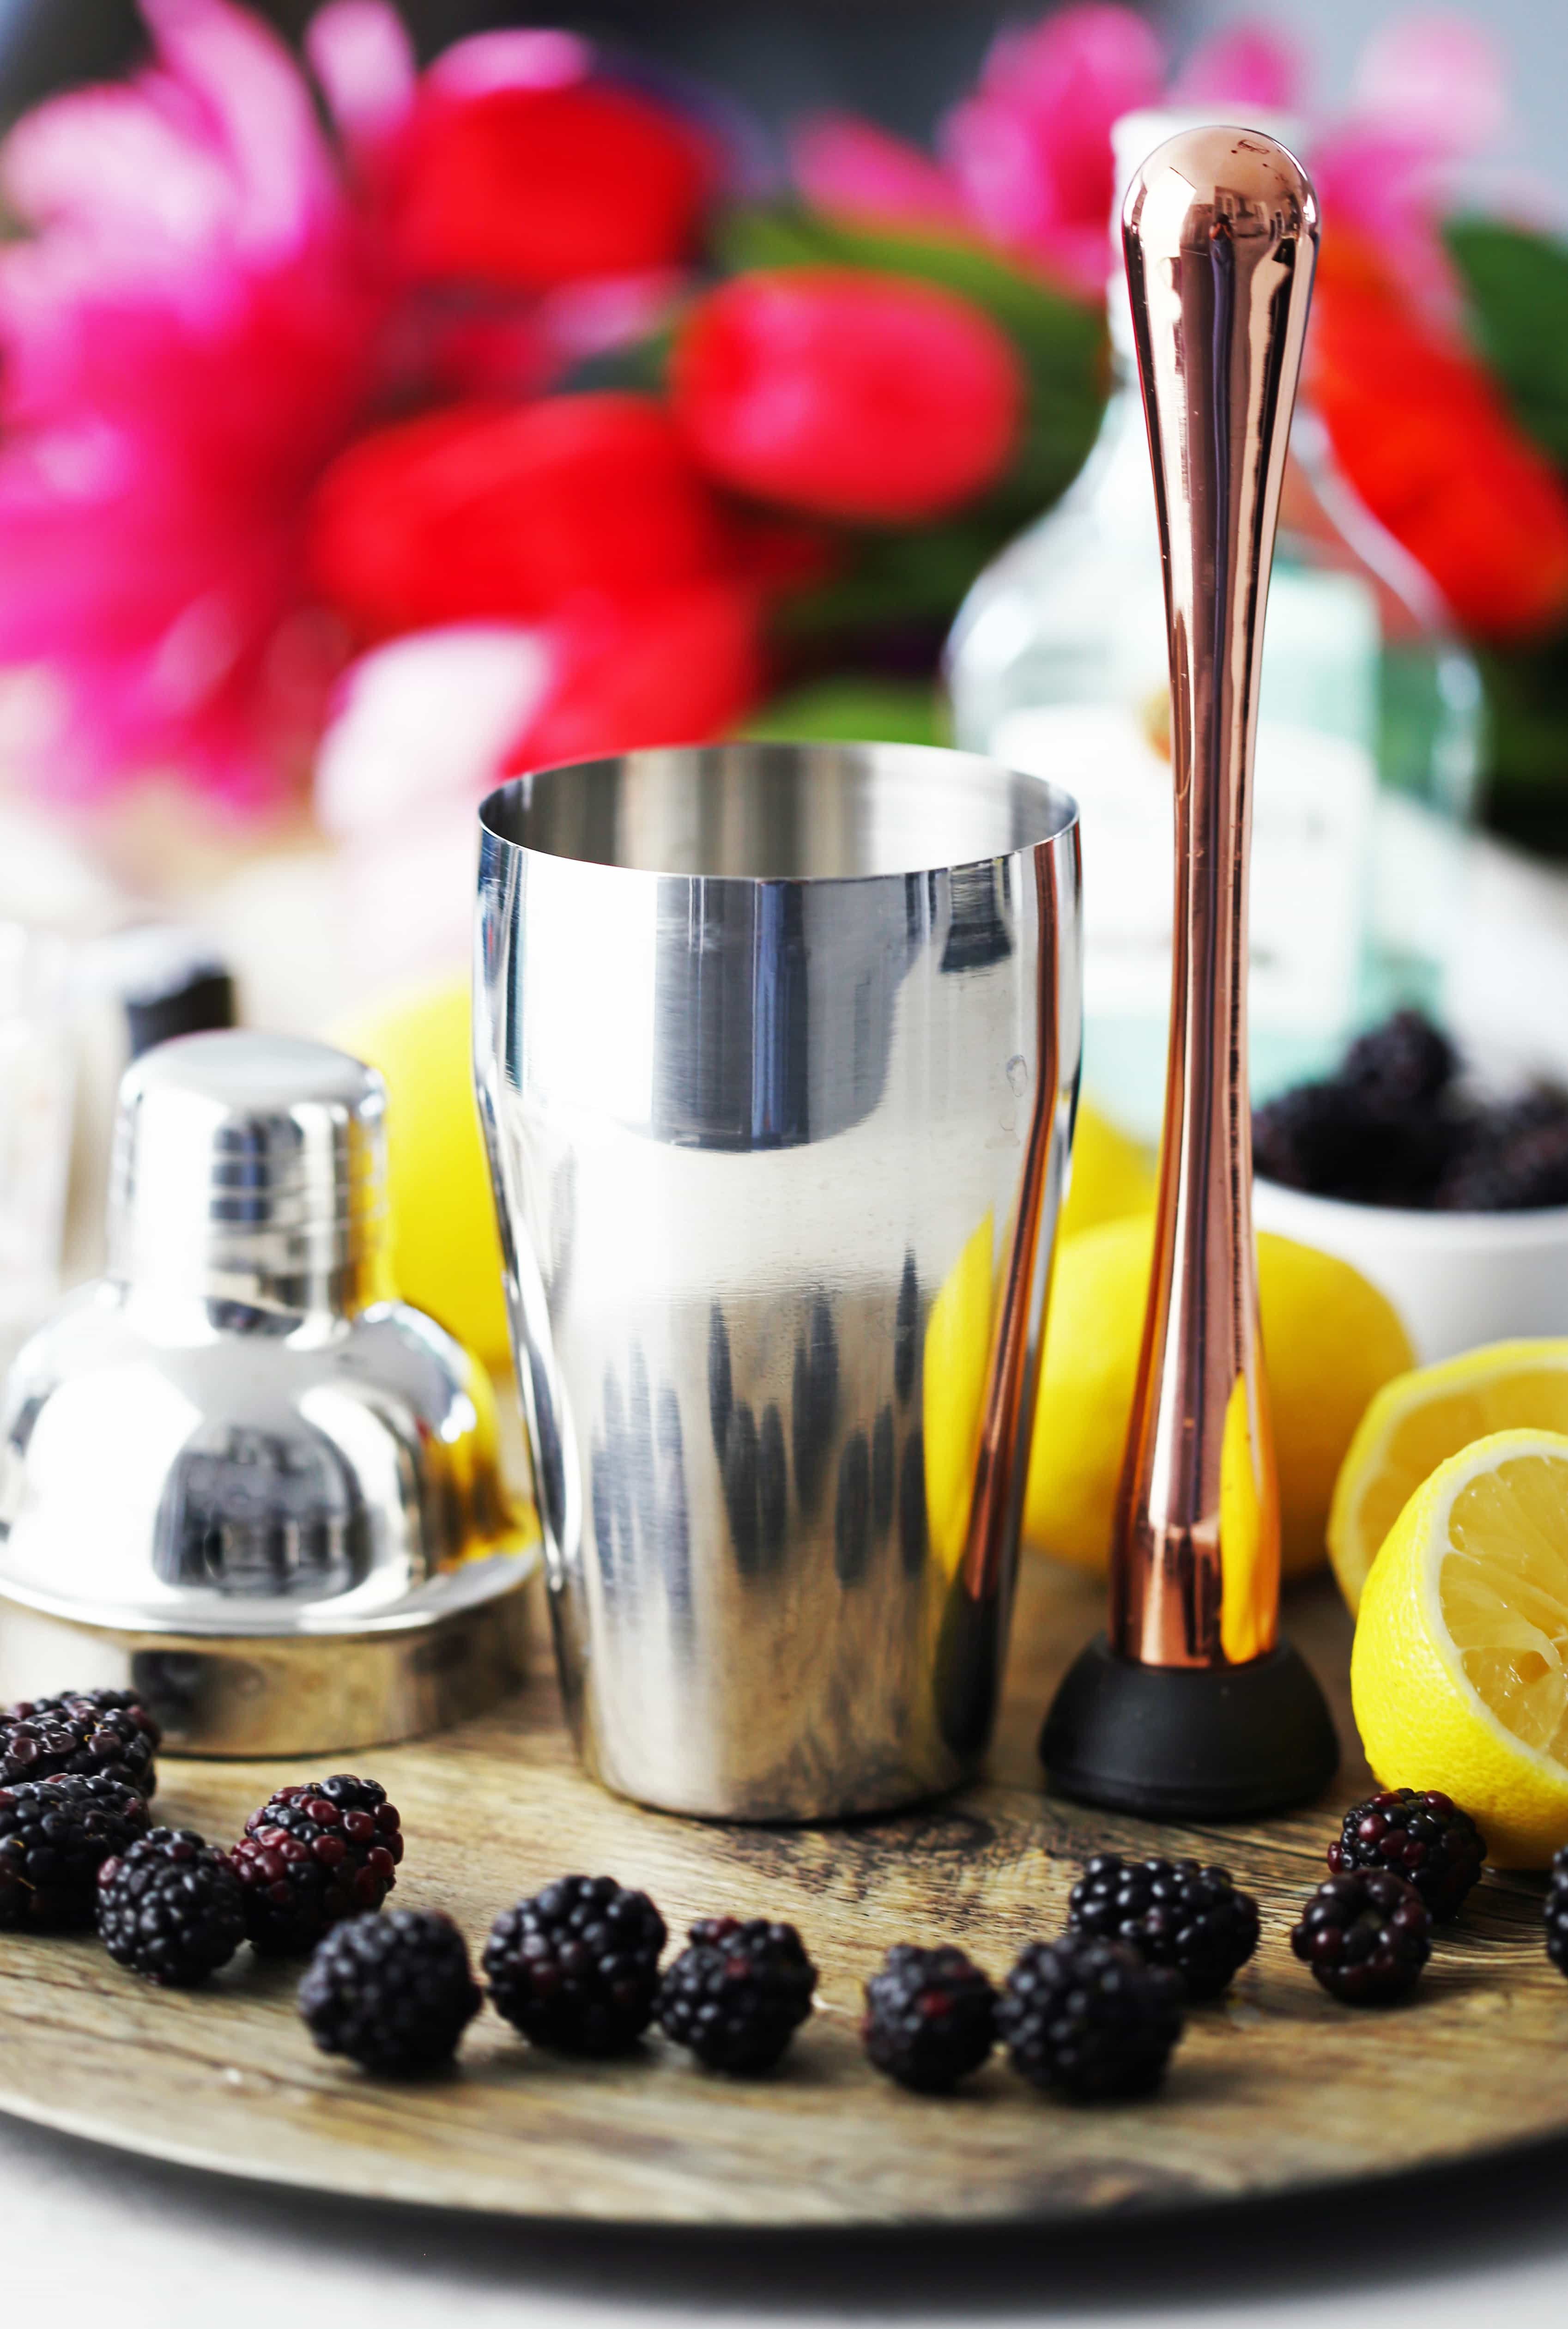 A stainless steel cocktail shaker and rose gold muddler on a wooden platter with blackberries and lemons